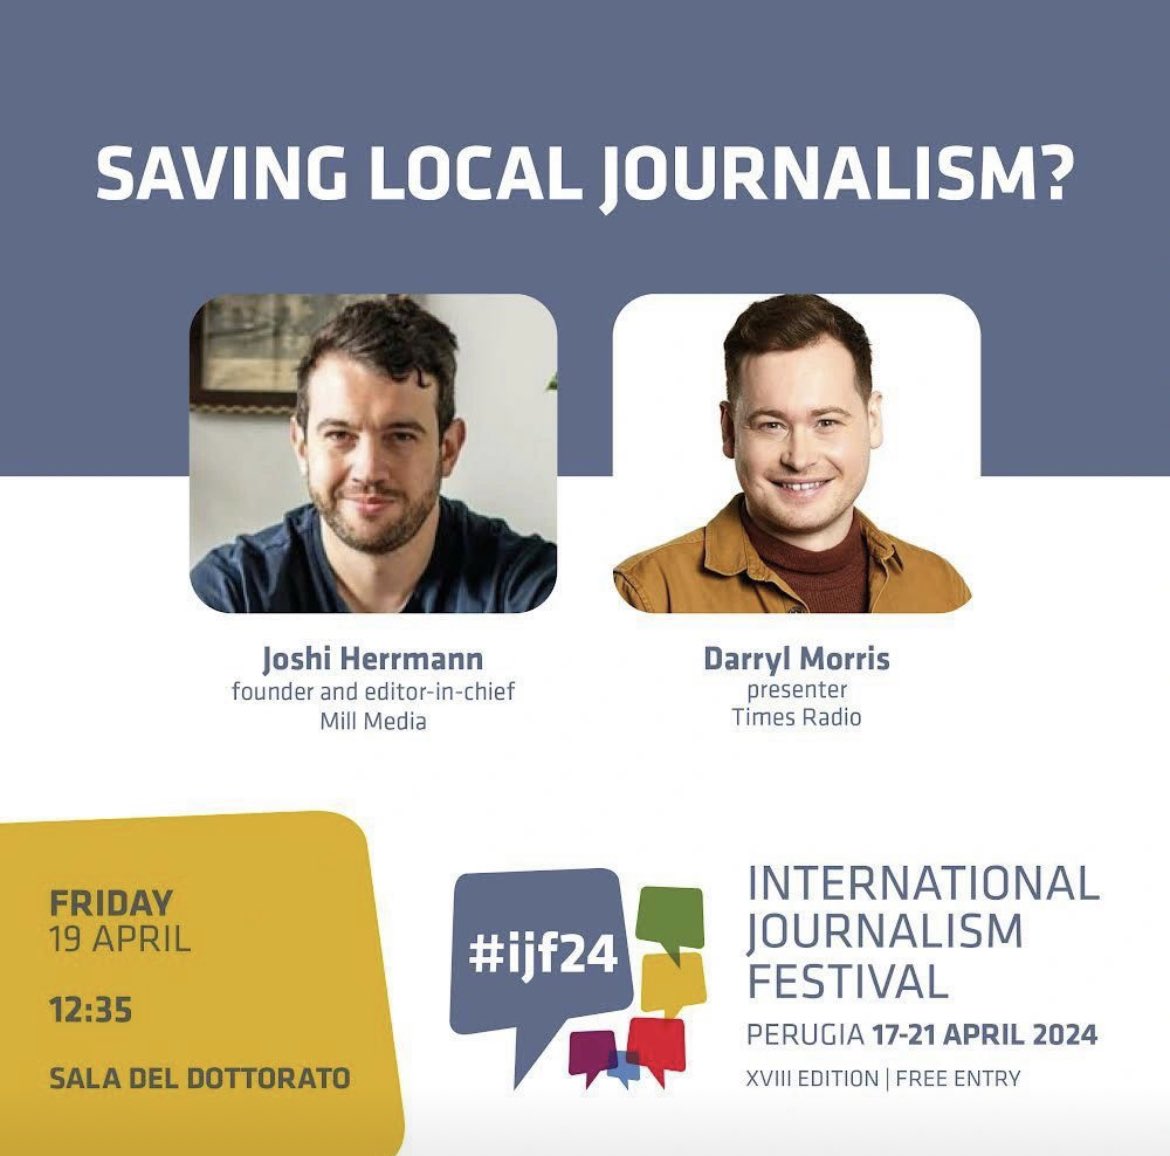 ITALY. Hi. Sorry for shouting. I’m at the International Journalism Festival this week and I’ll be on stage grilling @joshi about his media empire at 12:35 (11:35 UK) today. You can watch it live online here: journalismfestival.com/programme/2024… #ijf24 @journalismfest